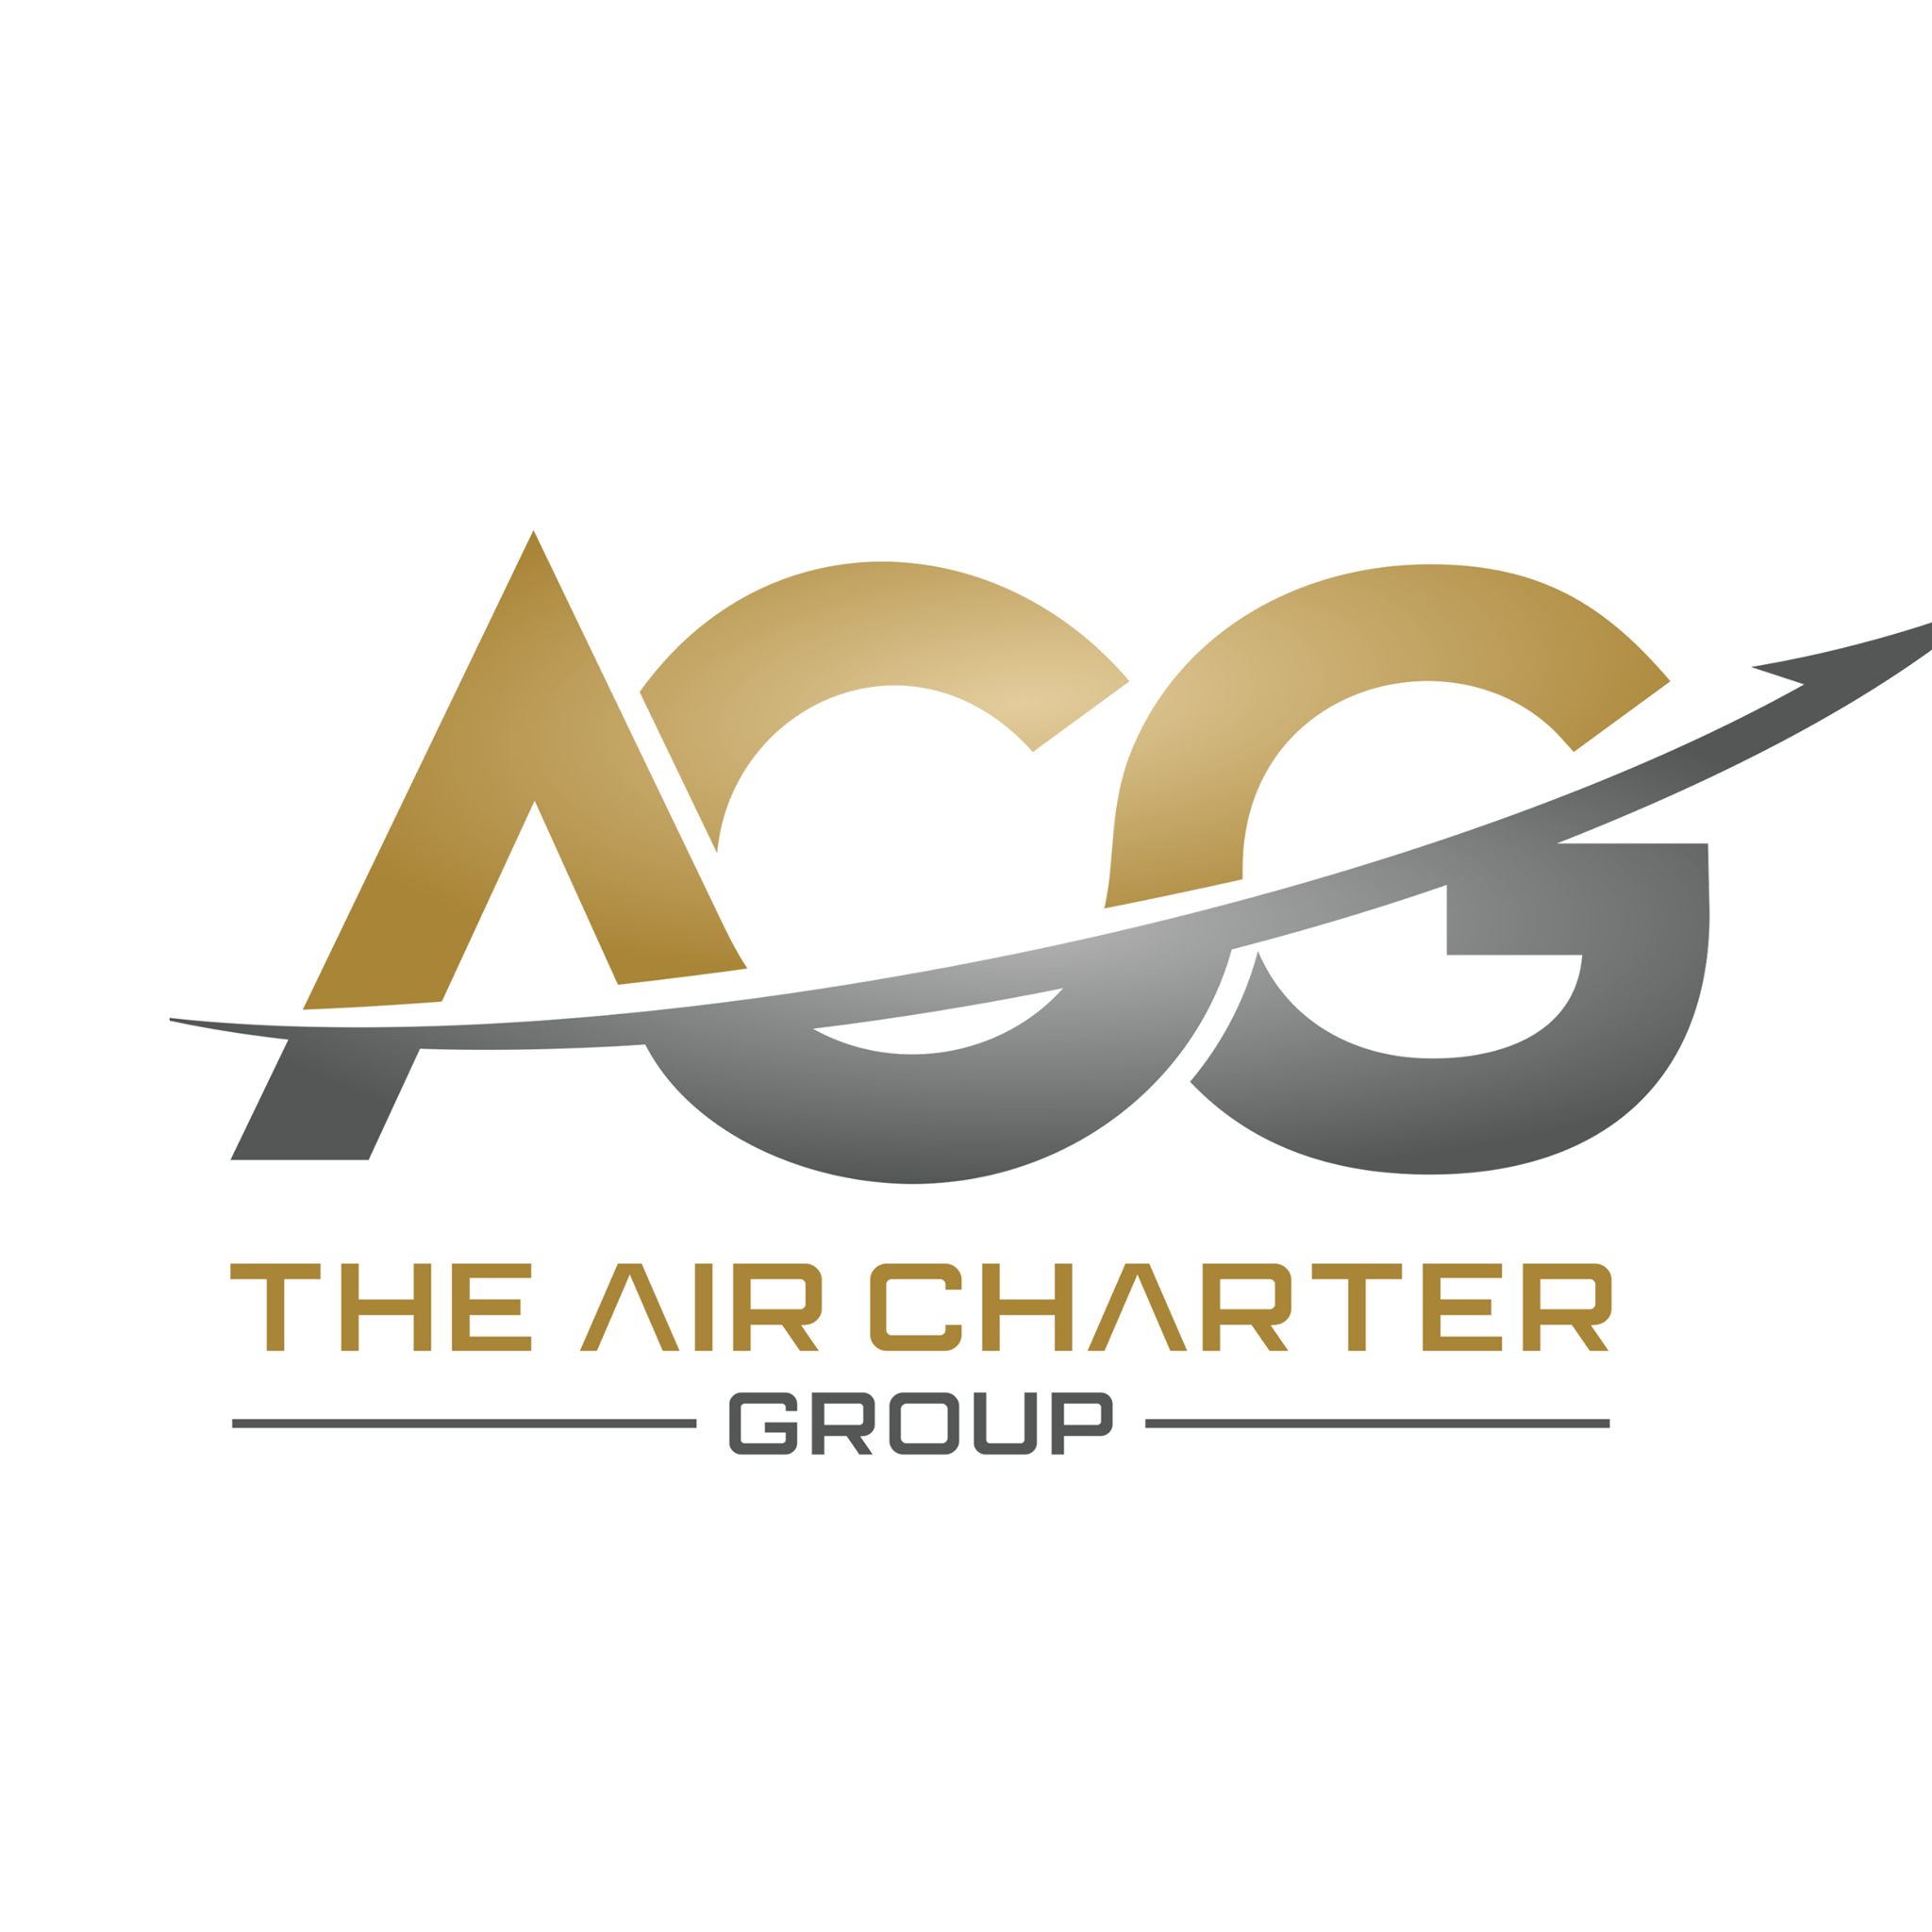 The Air Charter Group